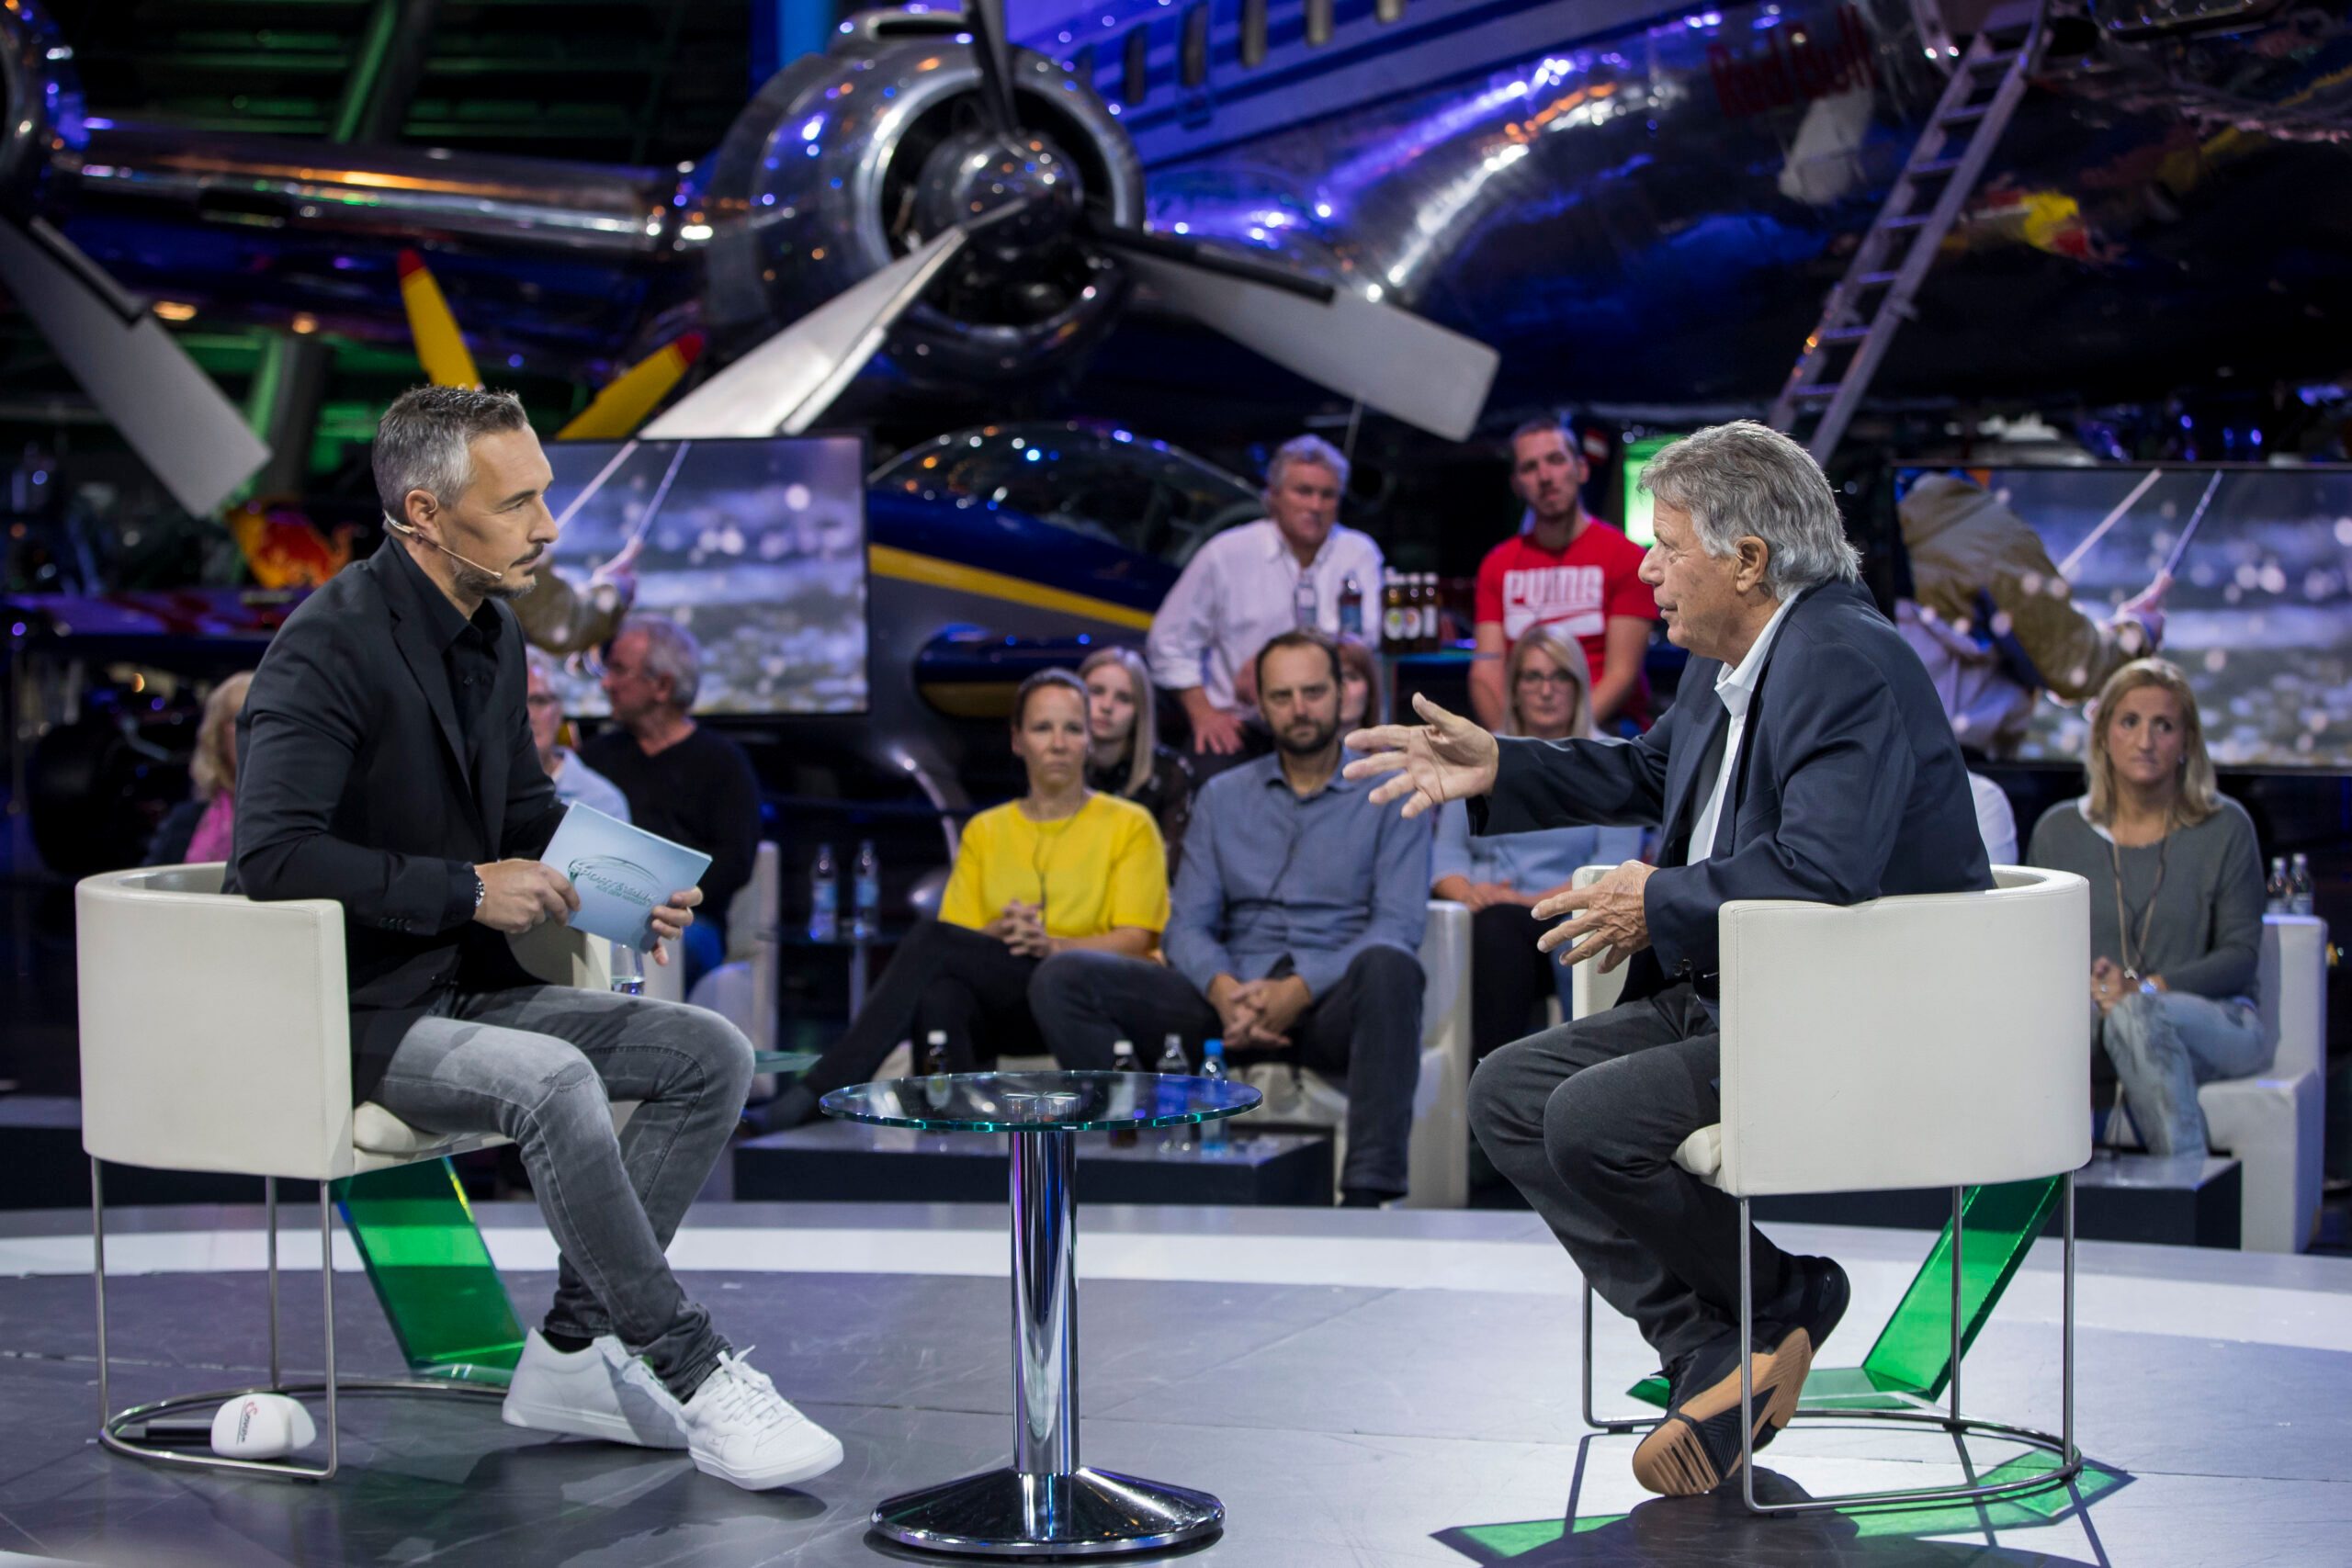 Christian Baier talking with Peter Schröcksnadel during Servus TV's Sport and Talk at the Hangar-7 in Salzburg, Austria on 19th of October 2020